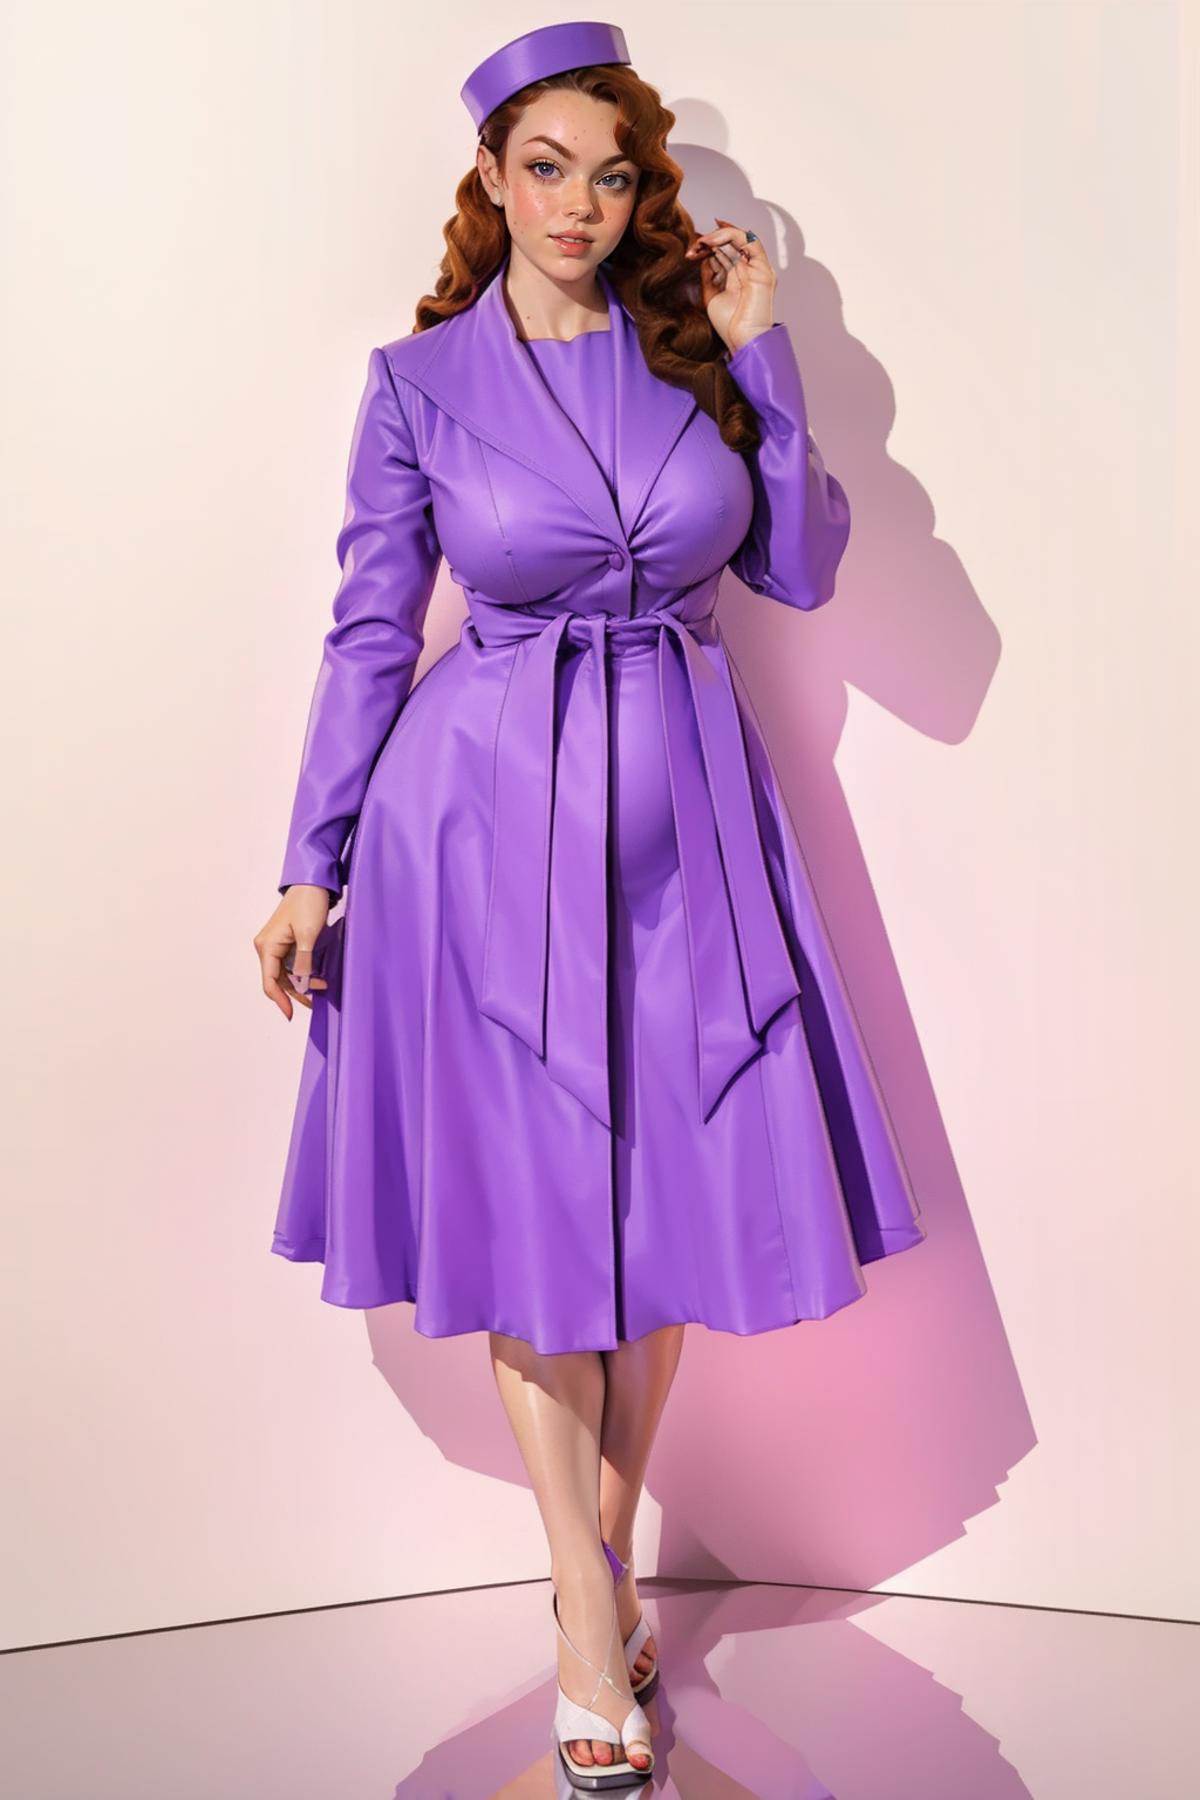 A woman wearing a purple coat and skirt posing for a photo.